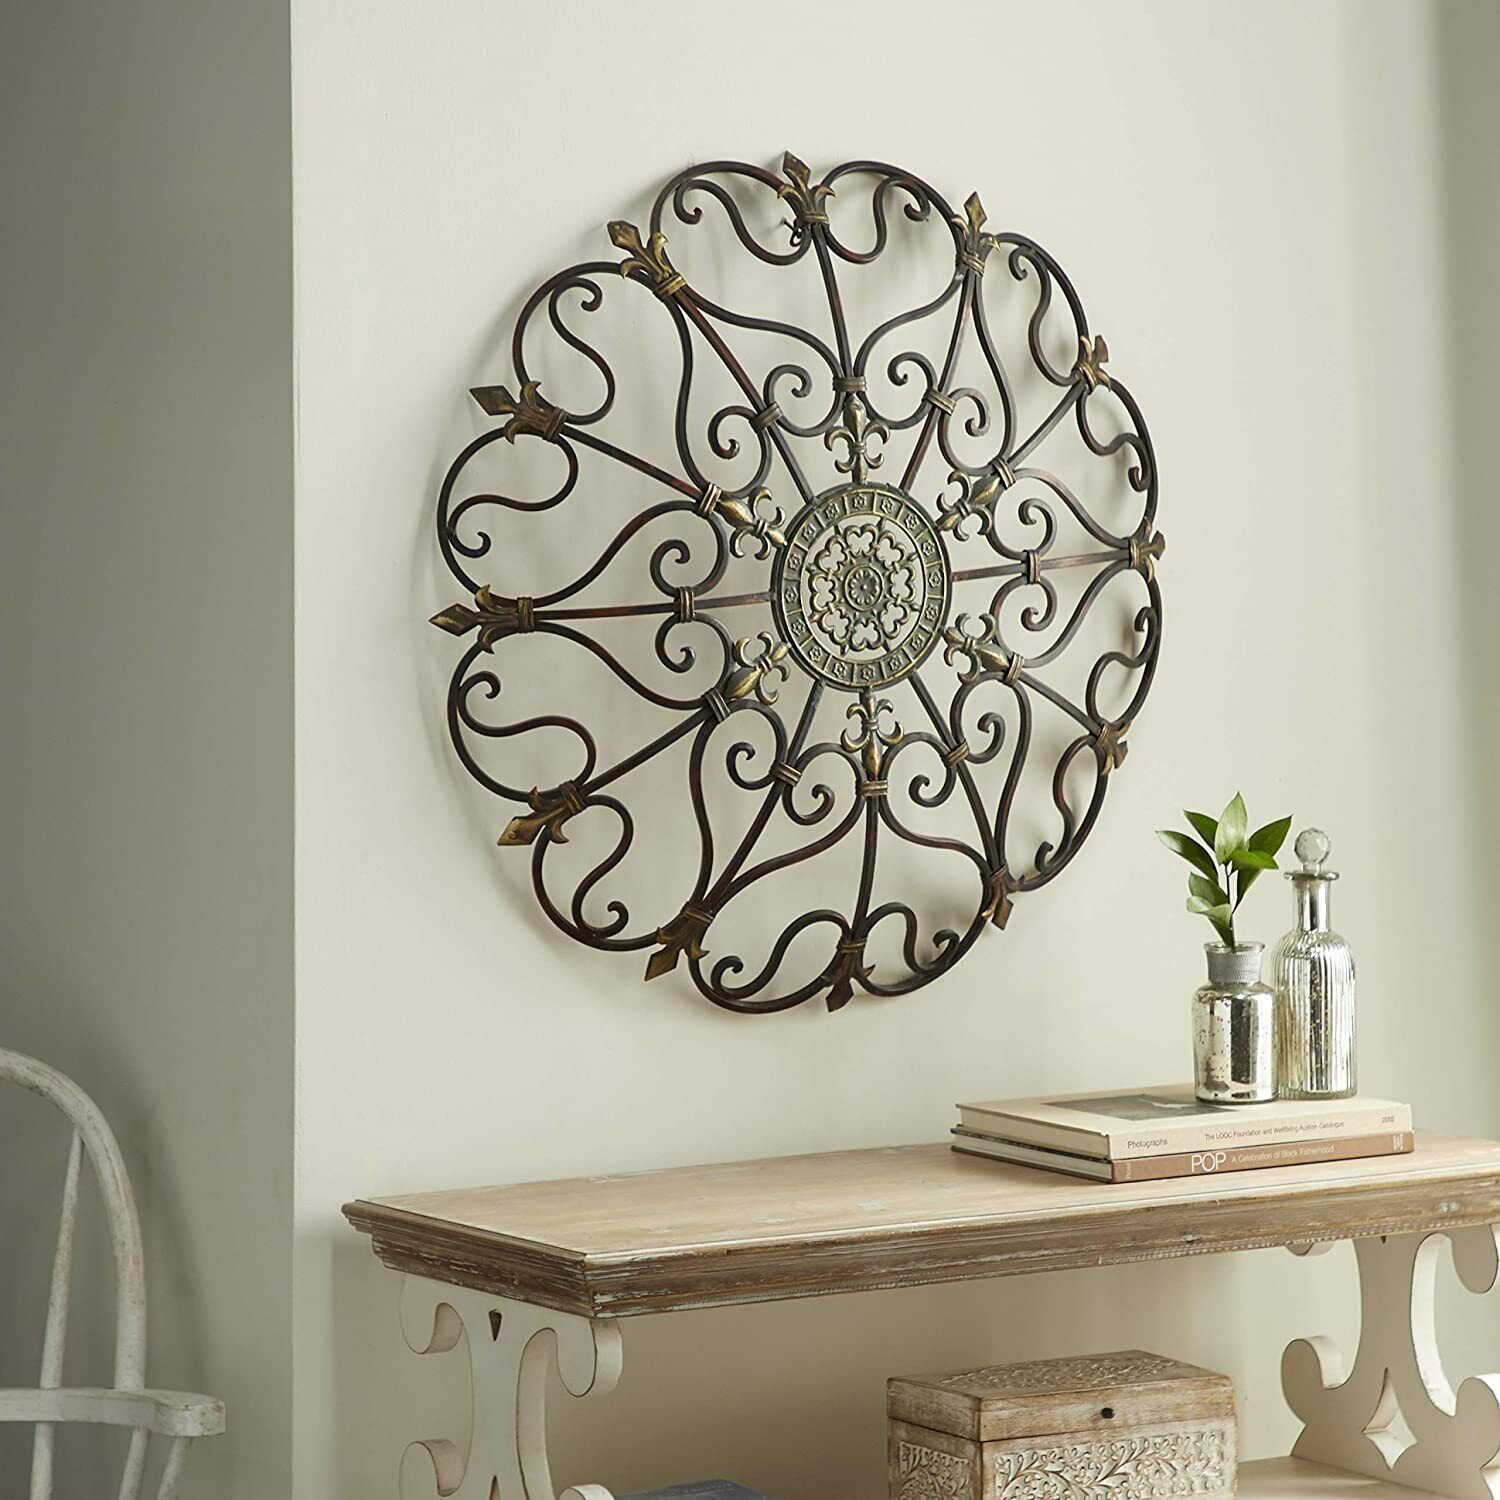 Hanging Metal Medallion Wall Art Decor 29" Circular Rustic Antique  Outdoor Home | Ebay With Regard To Current Rustic Decorative Wall Art (View 11 of 20)